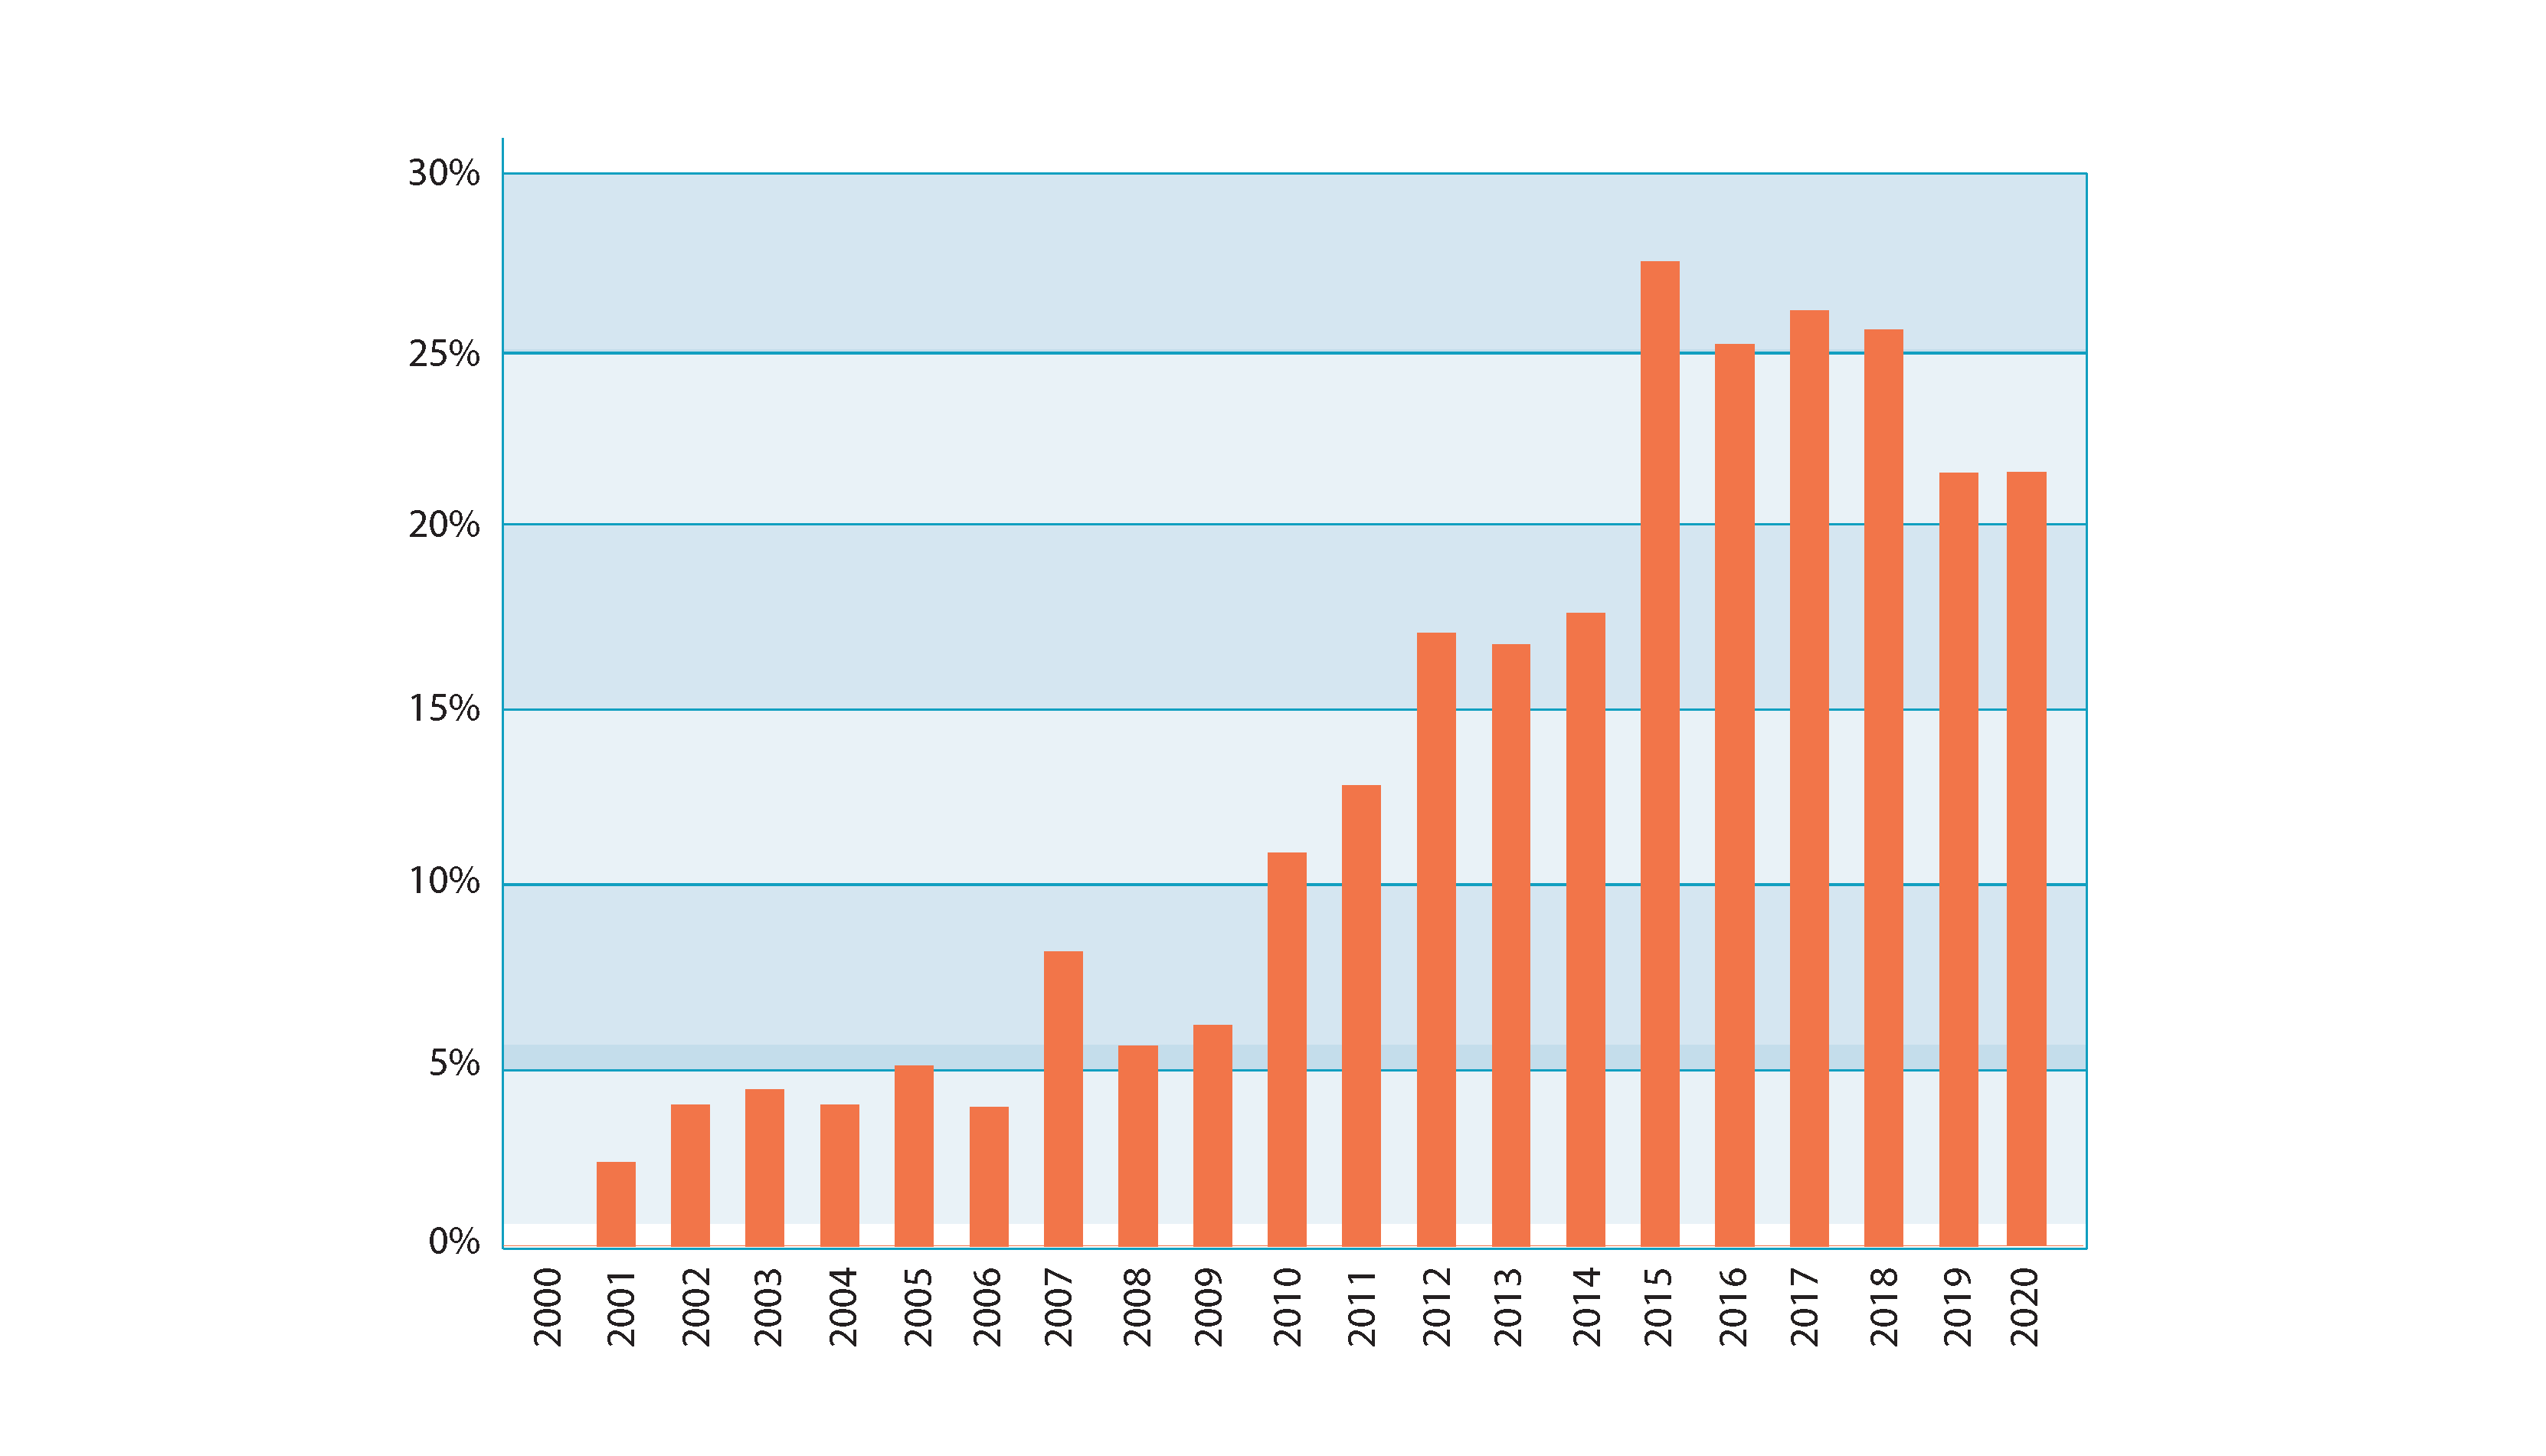 Bar chart with data from 2000 to 2020